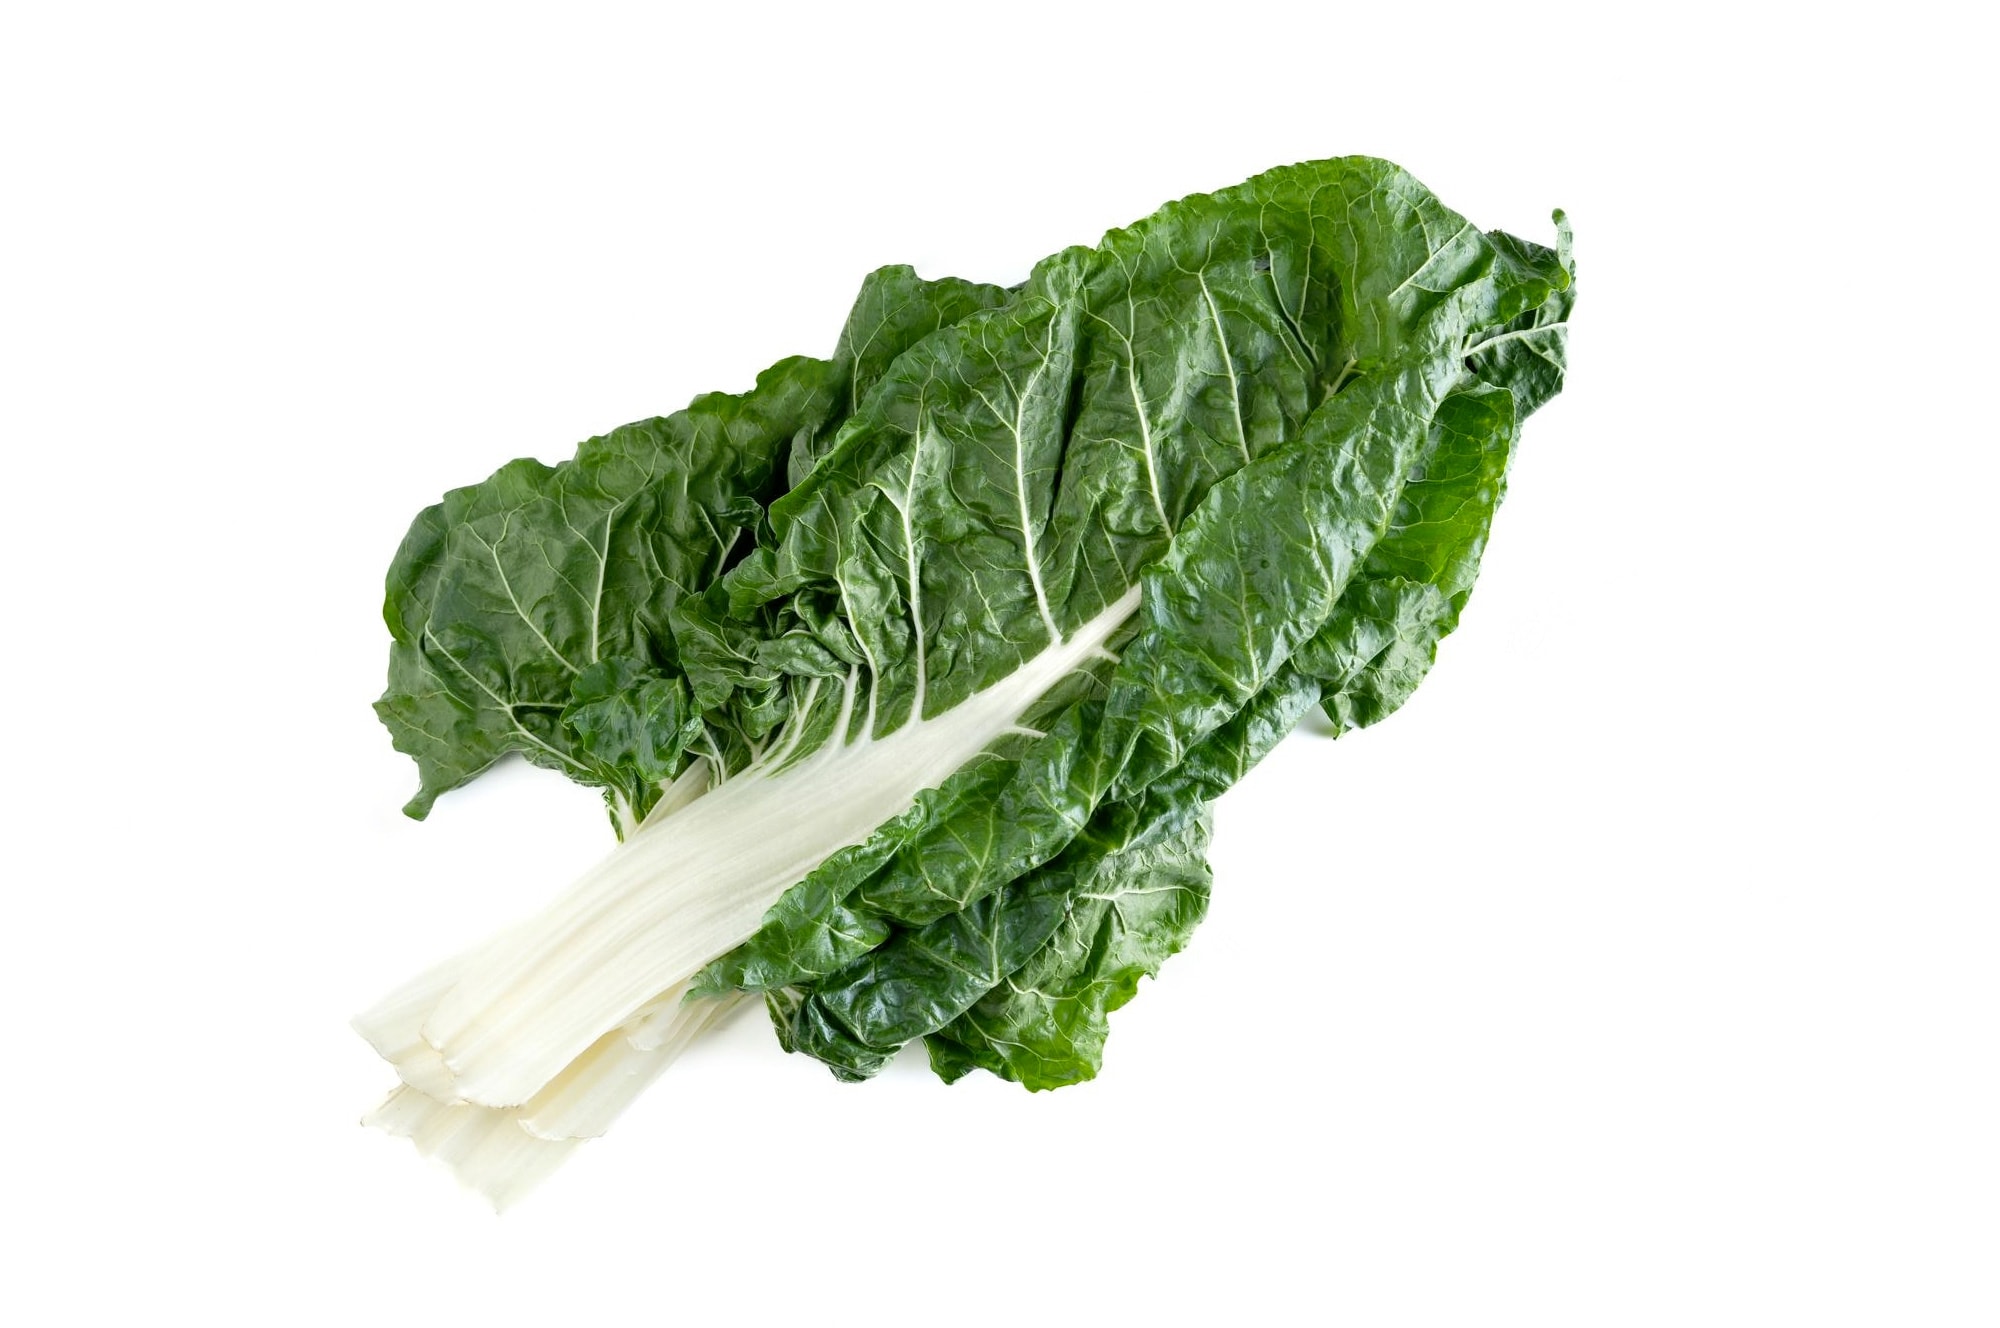 Silverbeet leaves isolated on a white background.